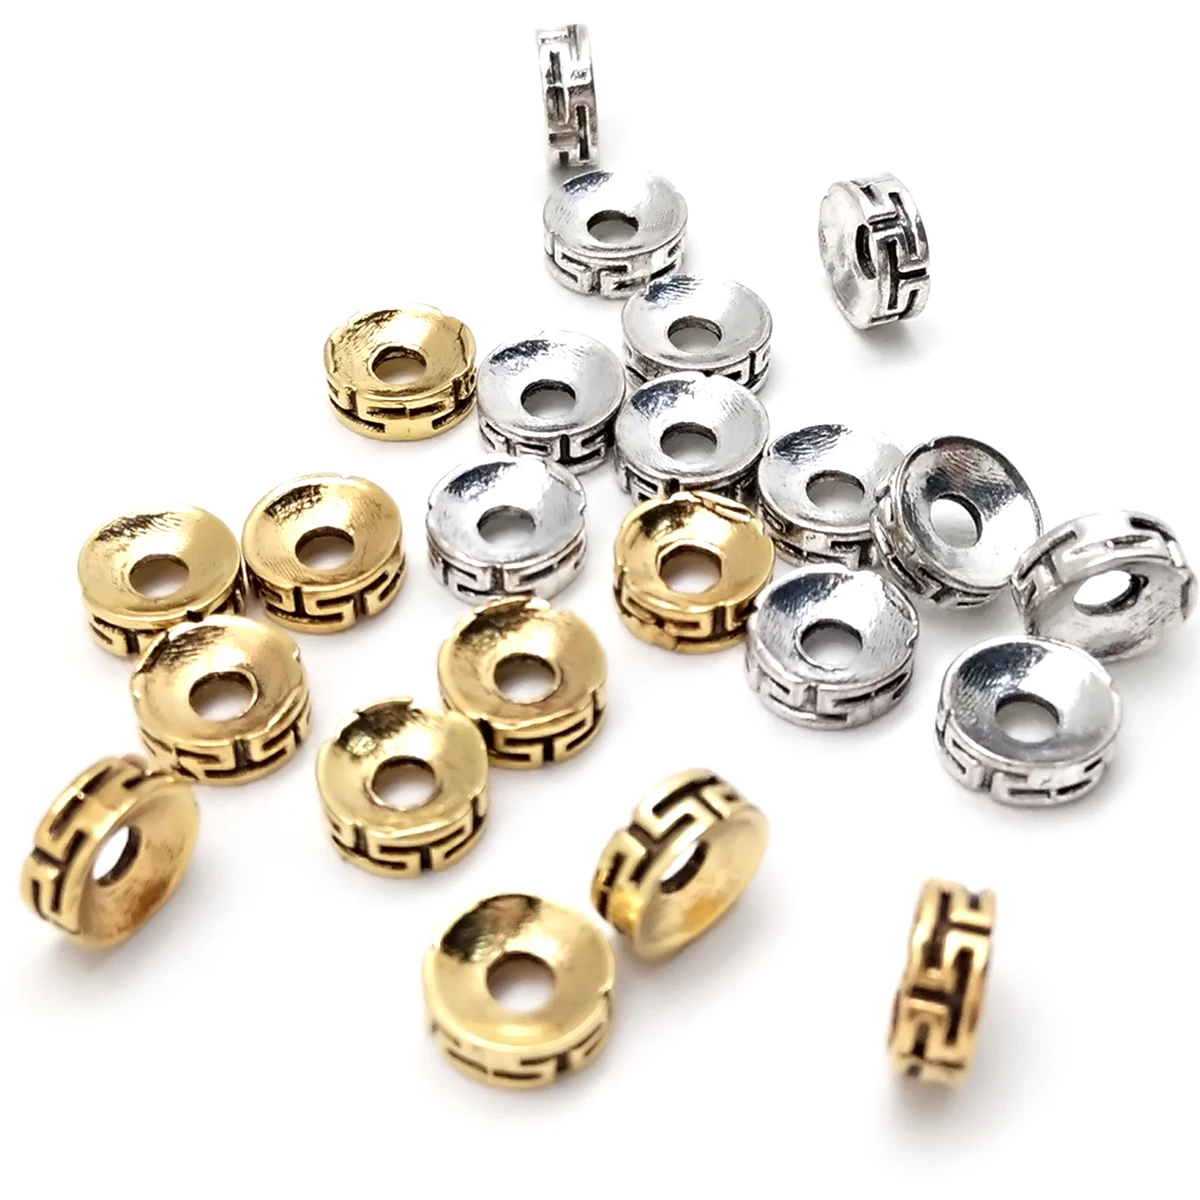 

3x7mm 30pcs Zinc Alloy Metal Spacer Beads Charms Pendant For Making Bracelet Necklace Jewelry Findings Making DIY, Gold/silver